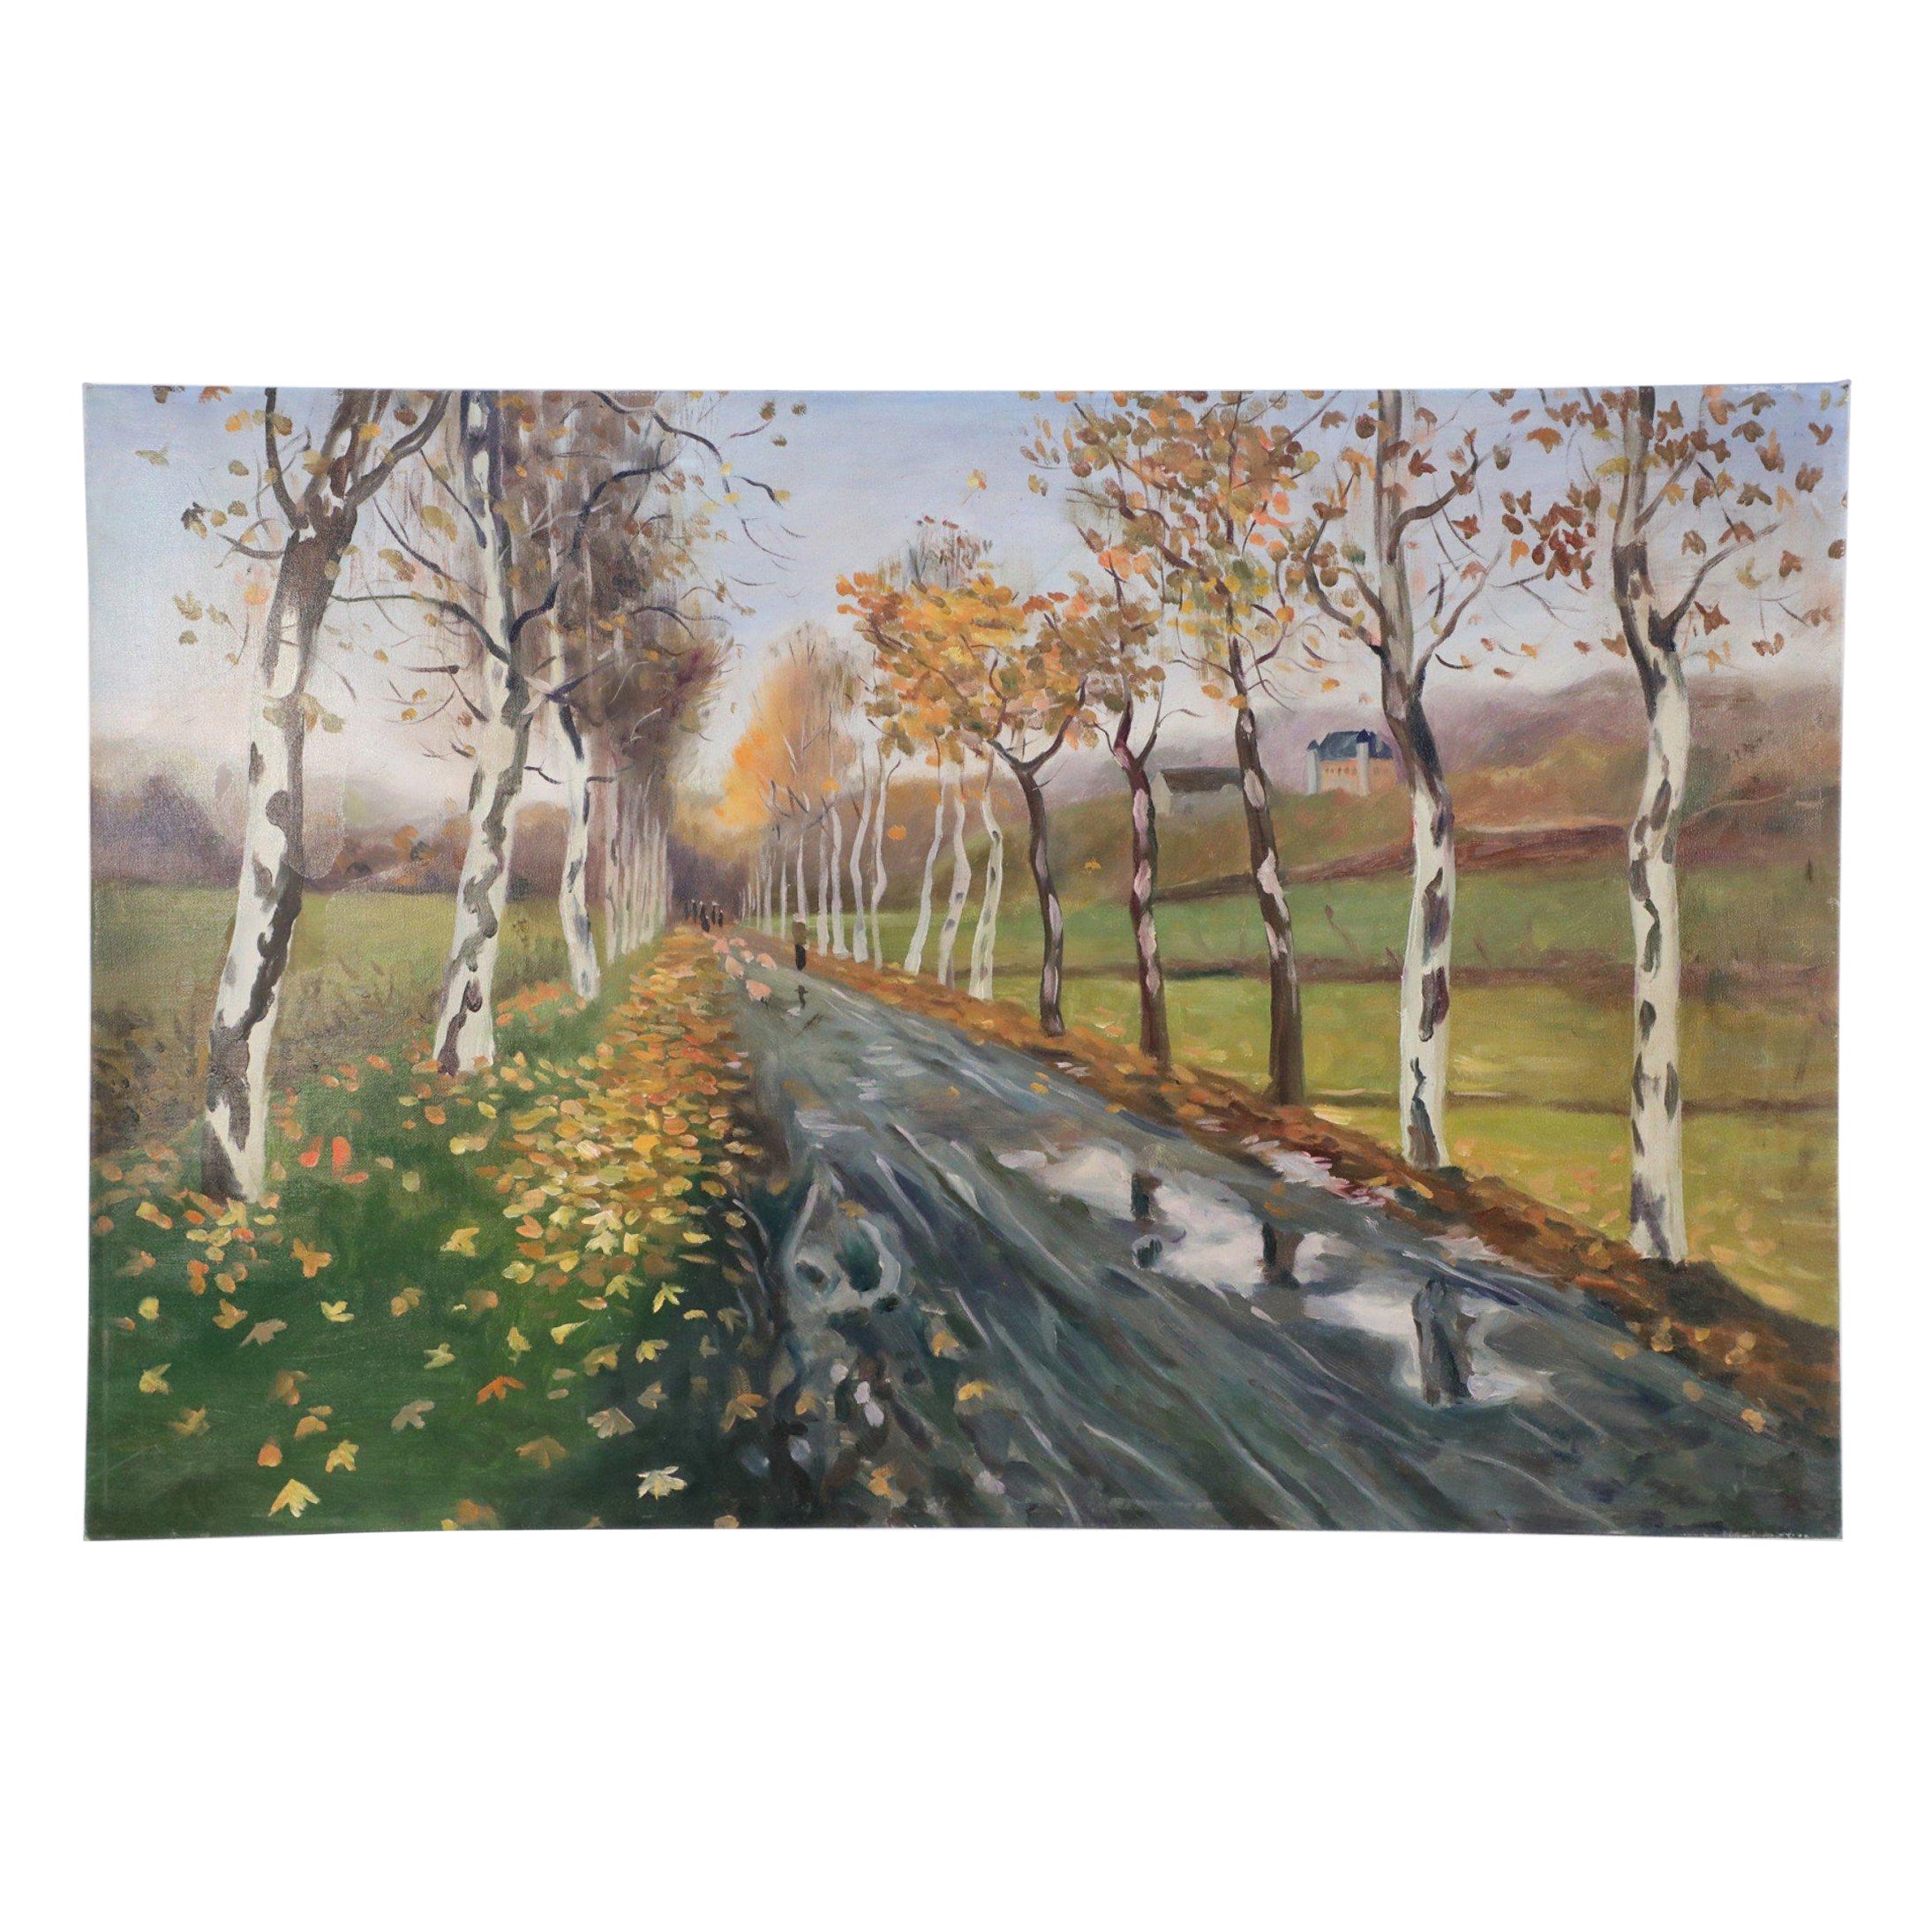 Birch Tree Lined Road and Landscape Painting on Canvas